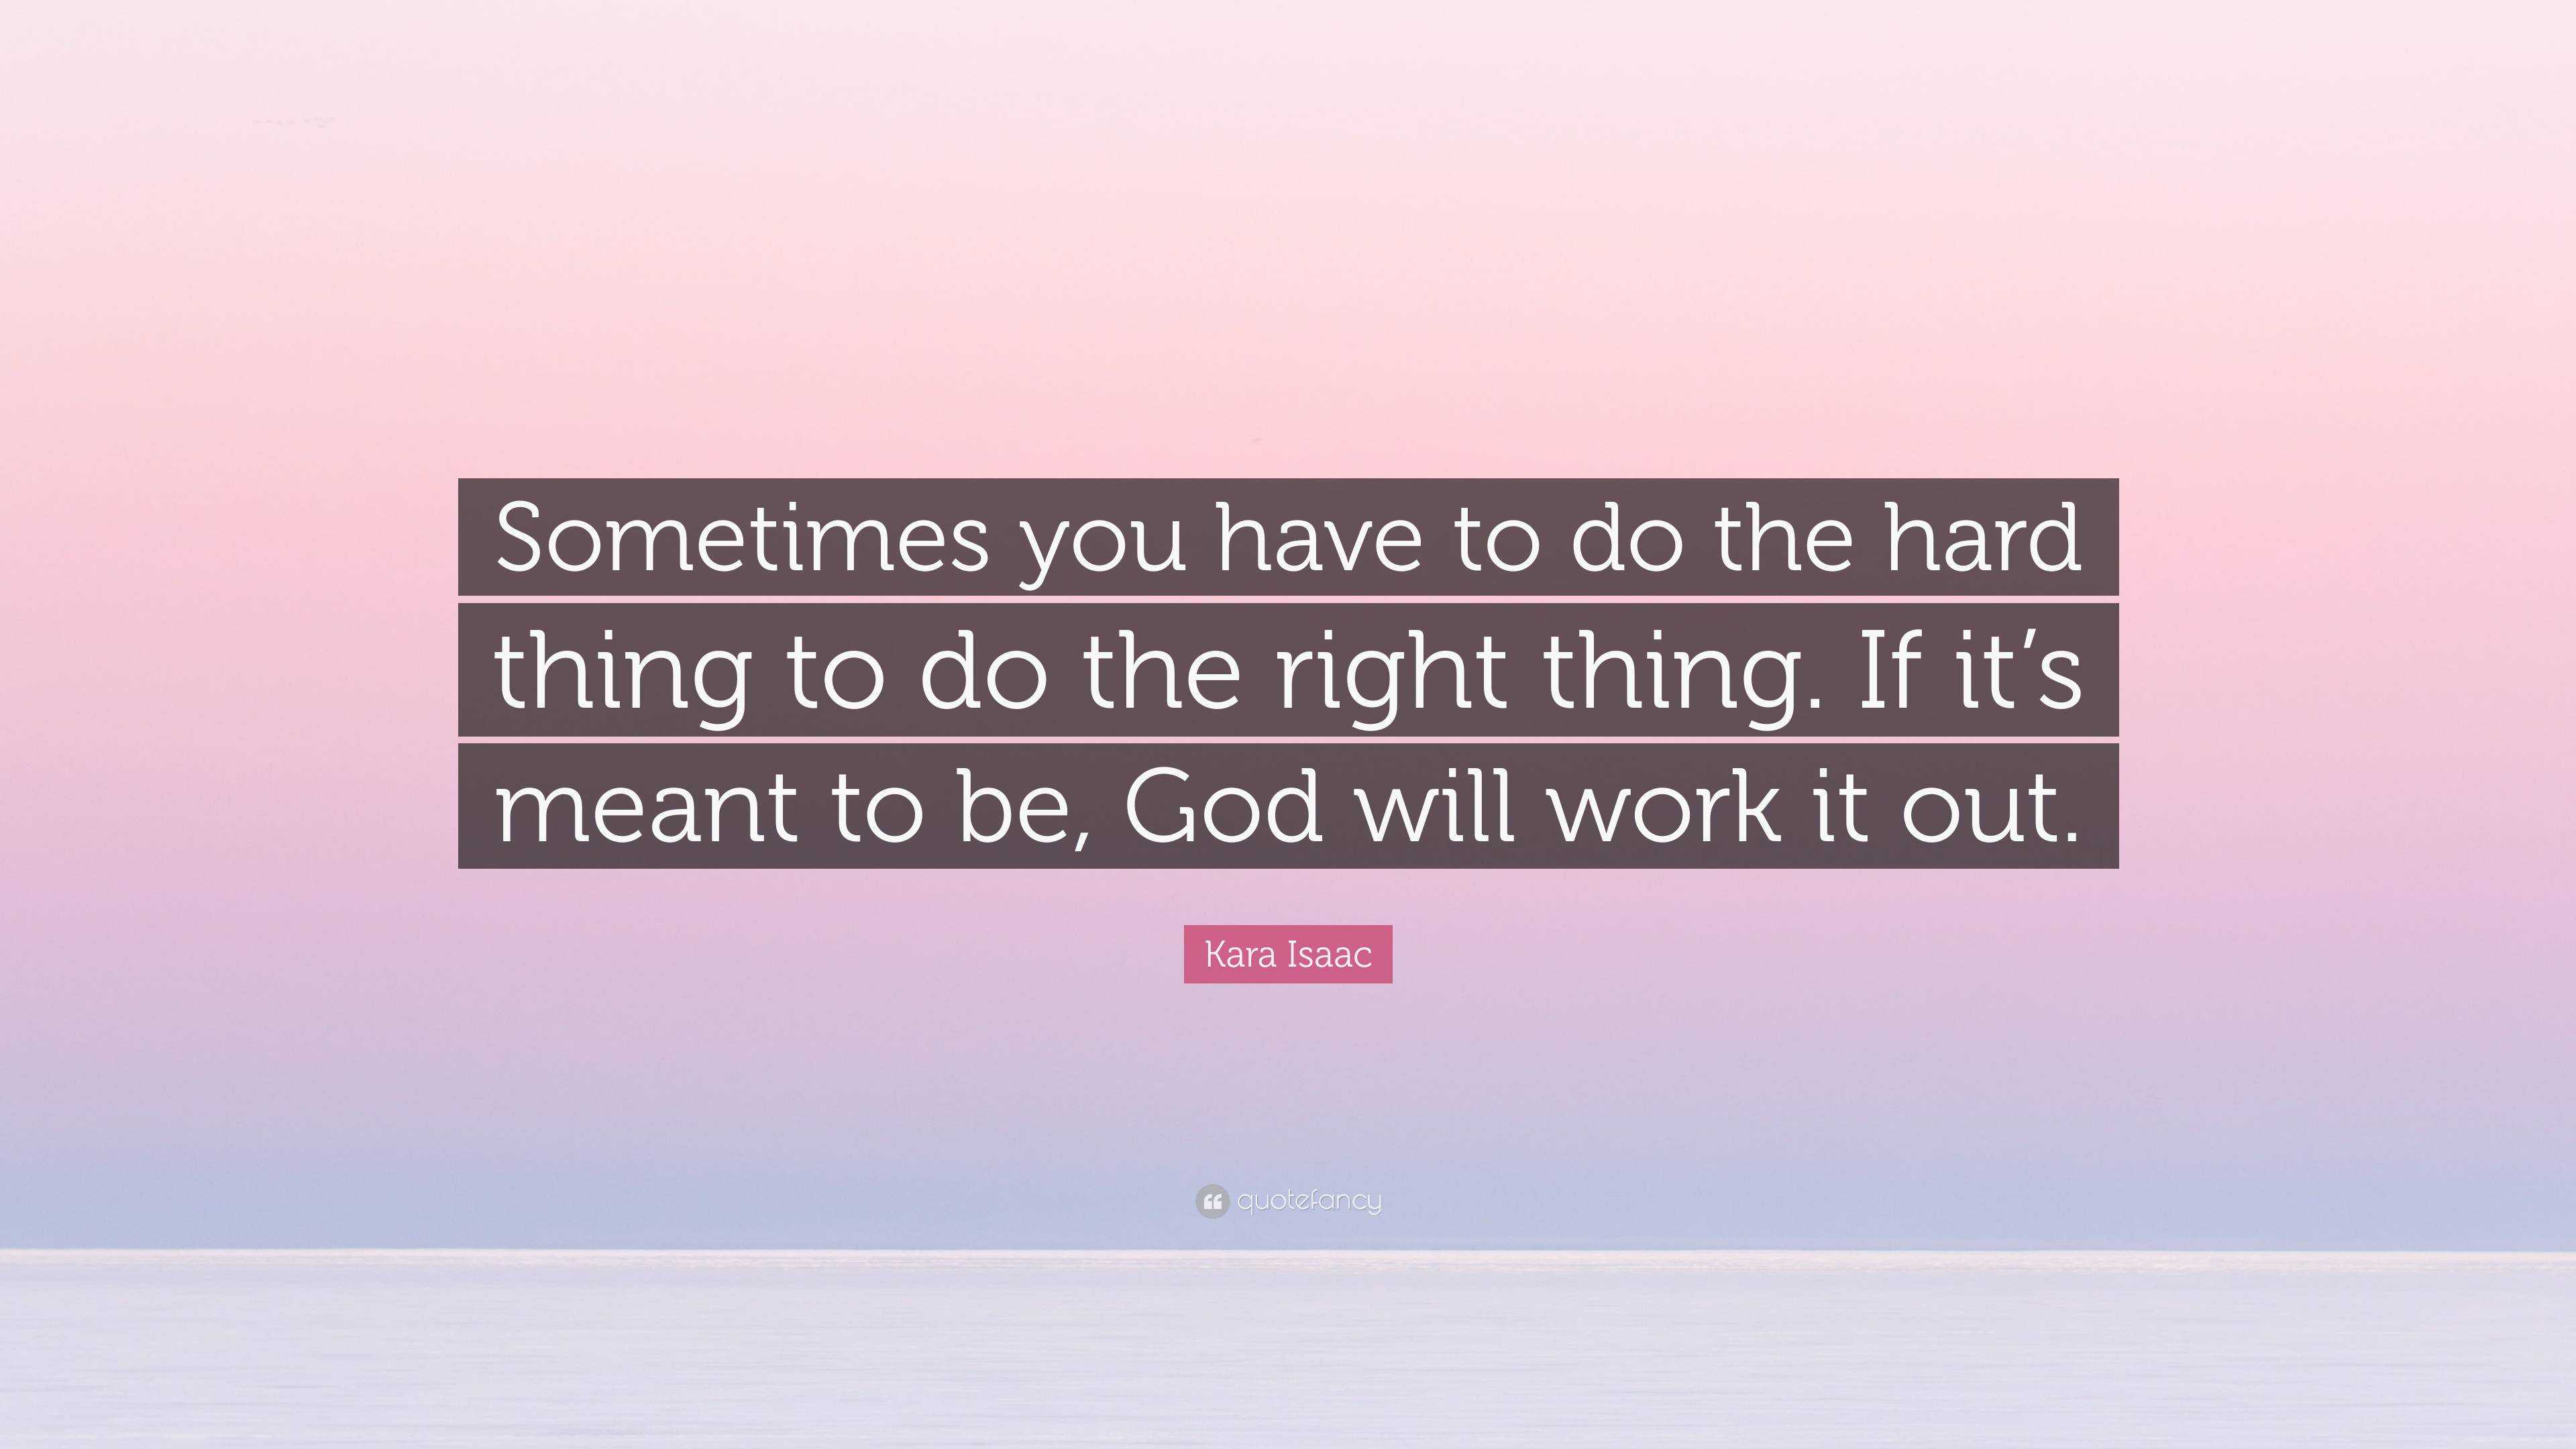 doing the right thing is hard quotes